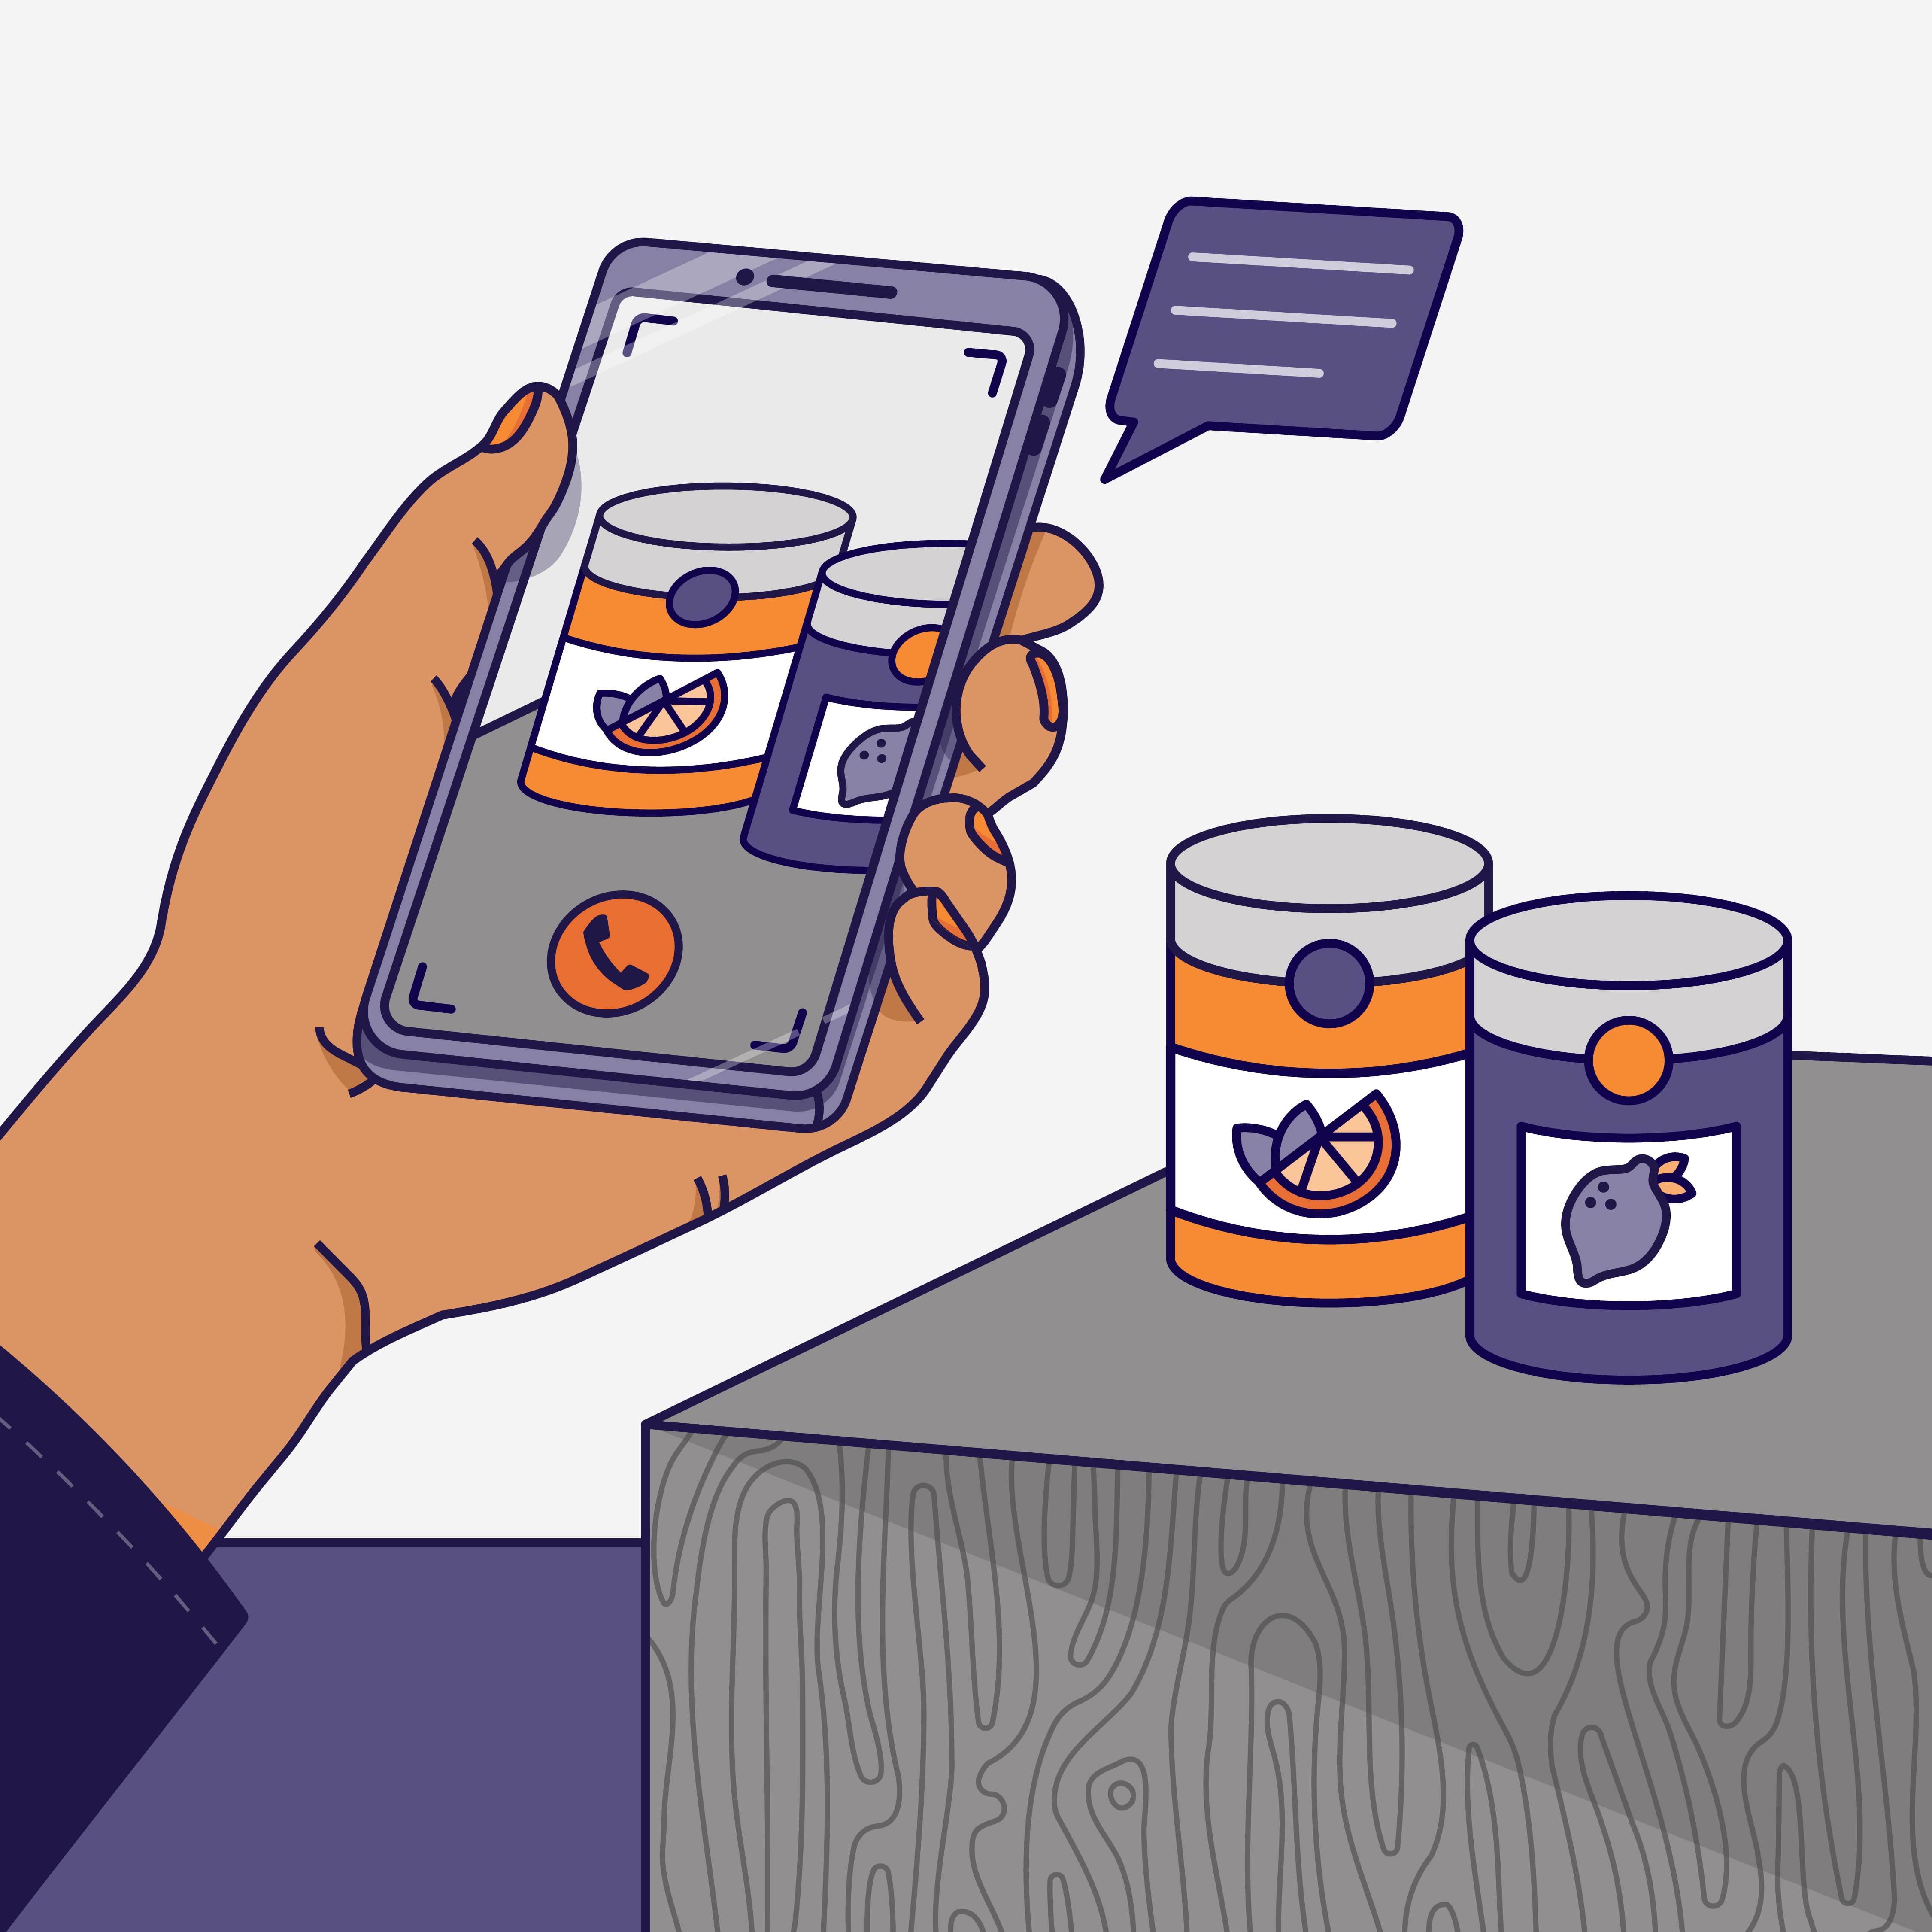 An illustration of a hand holding a mobile phone. In the background are 2 cans of food on a bench. The screen of the mobile shows the 2 cans. There is a text bubble indicating that the phone is giving a description of the cans. 